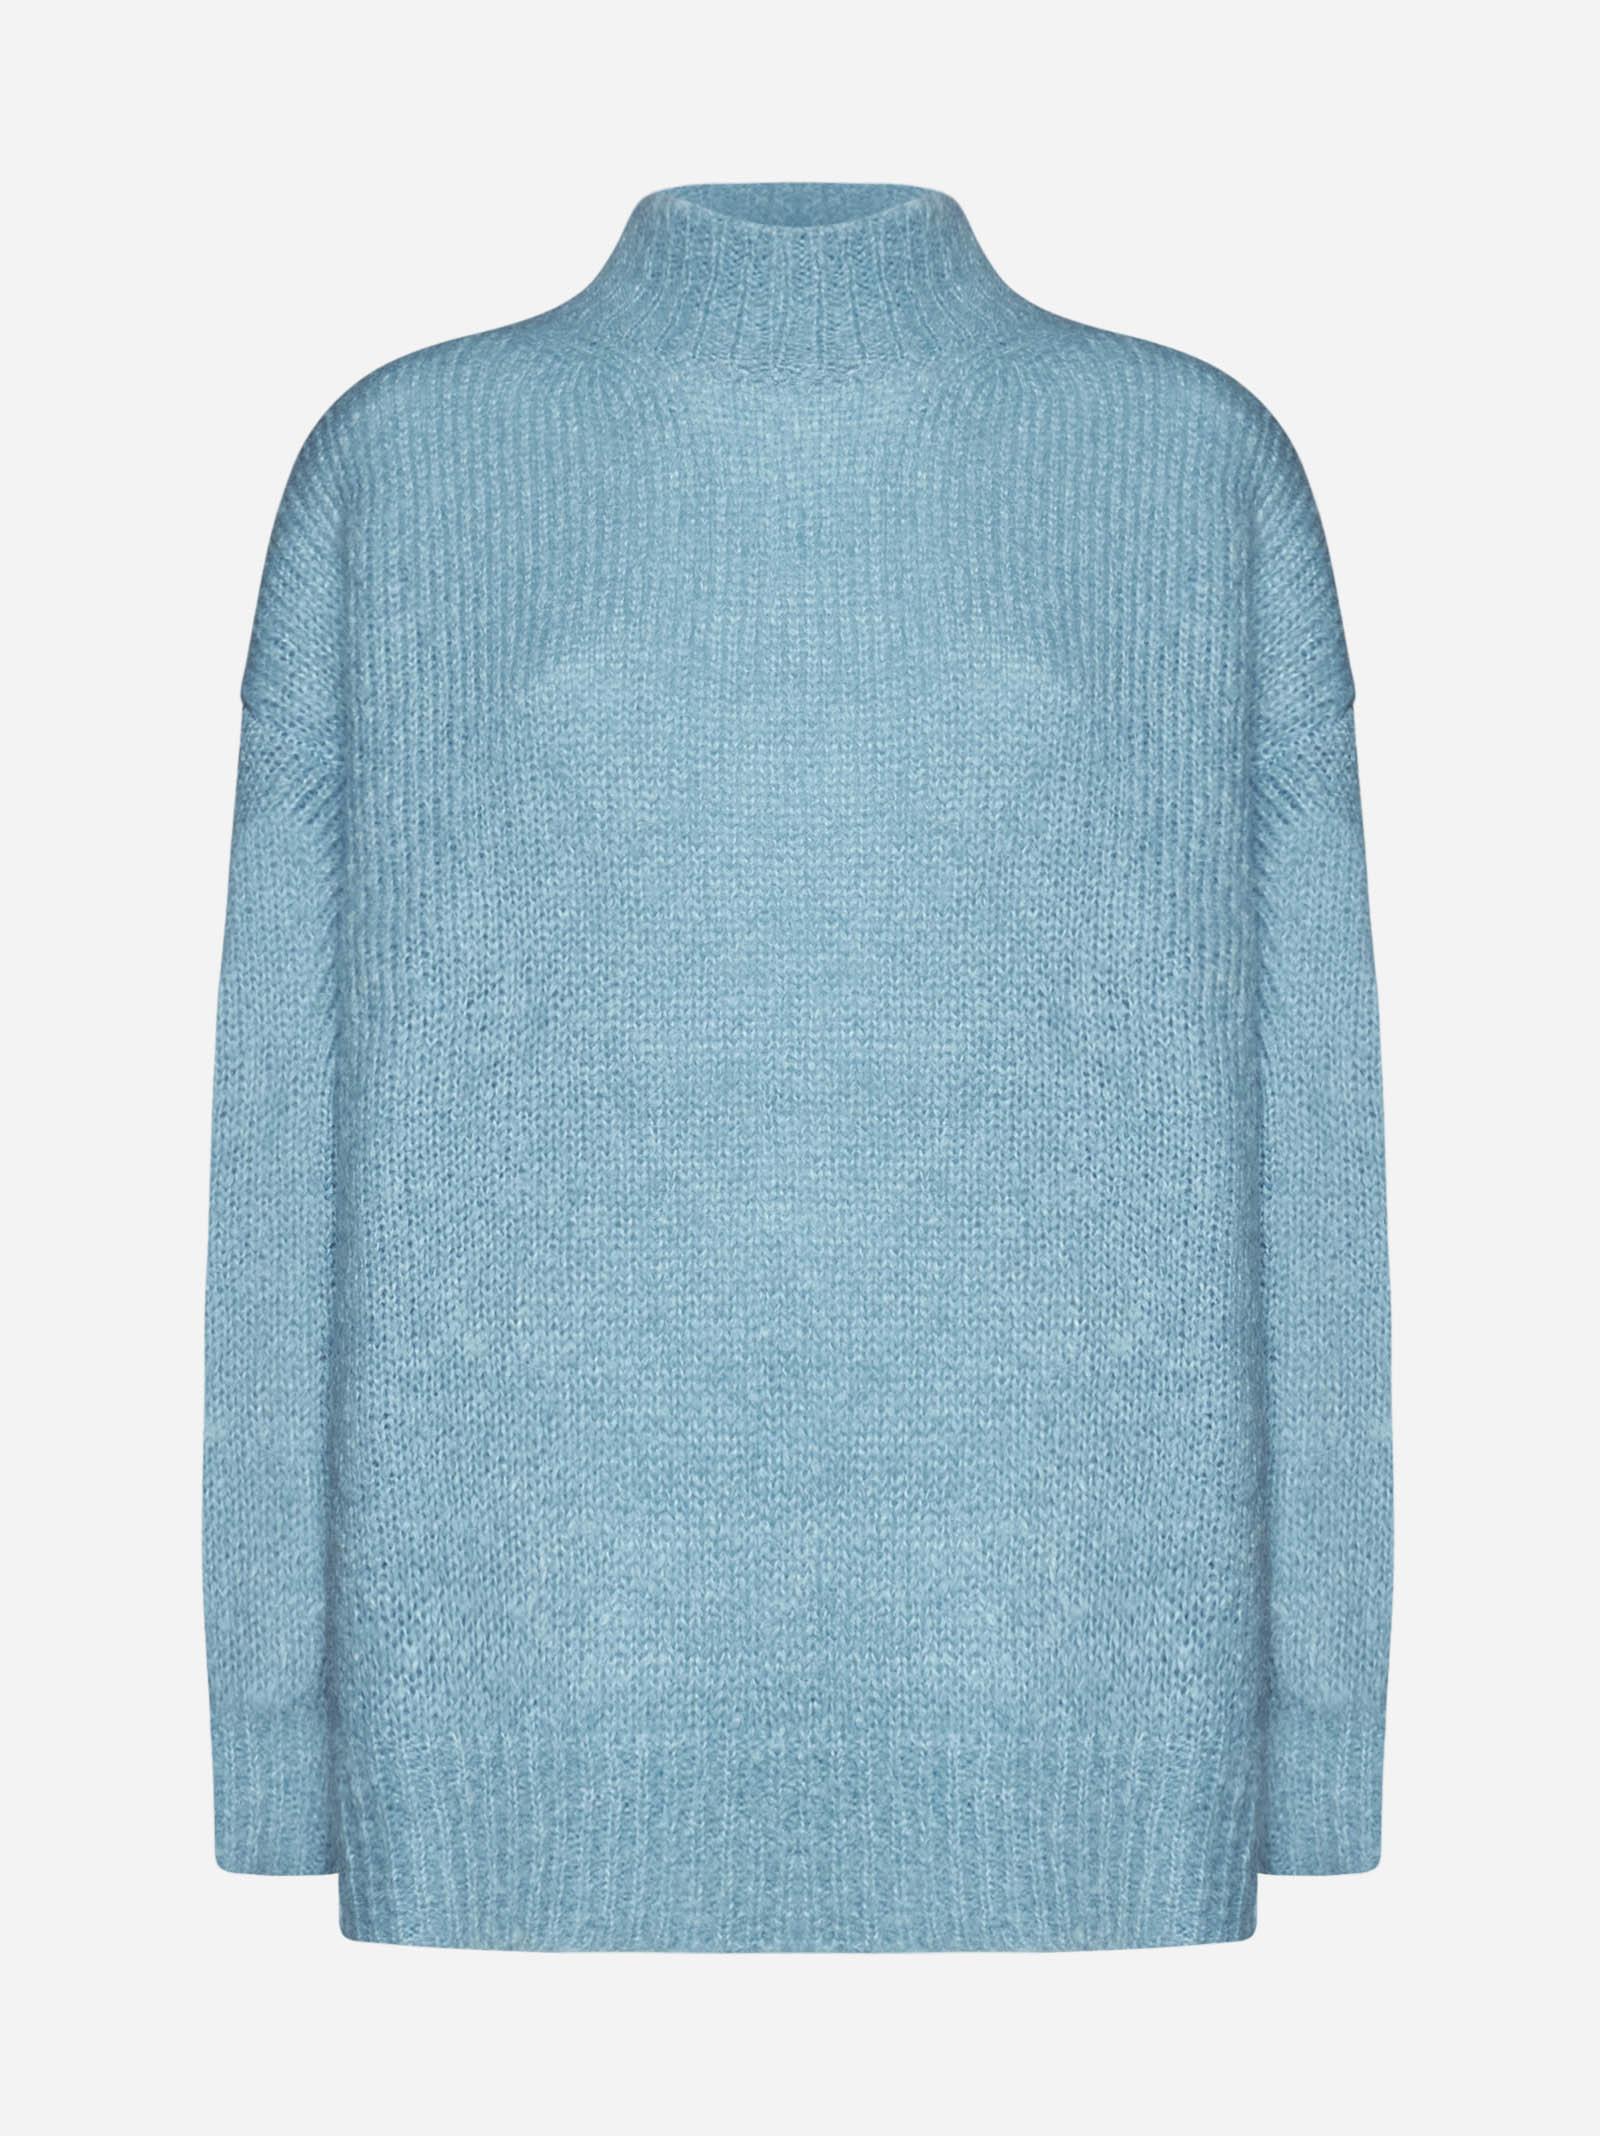 Idol Wool And Cashmere Sweater